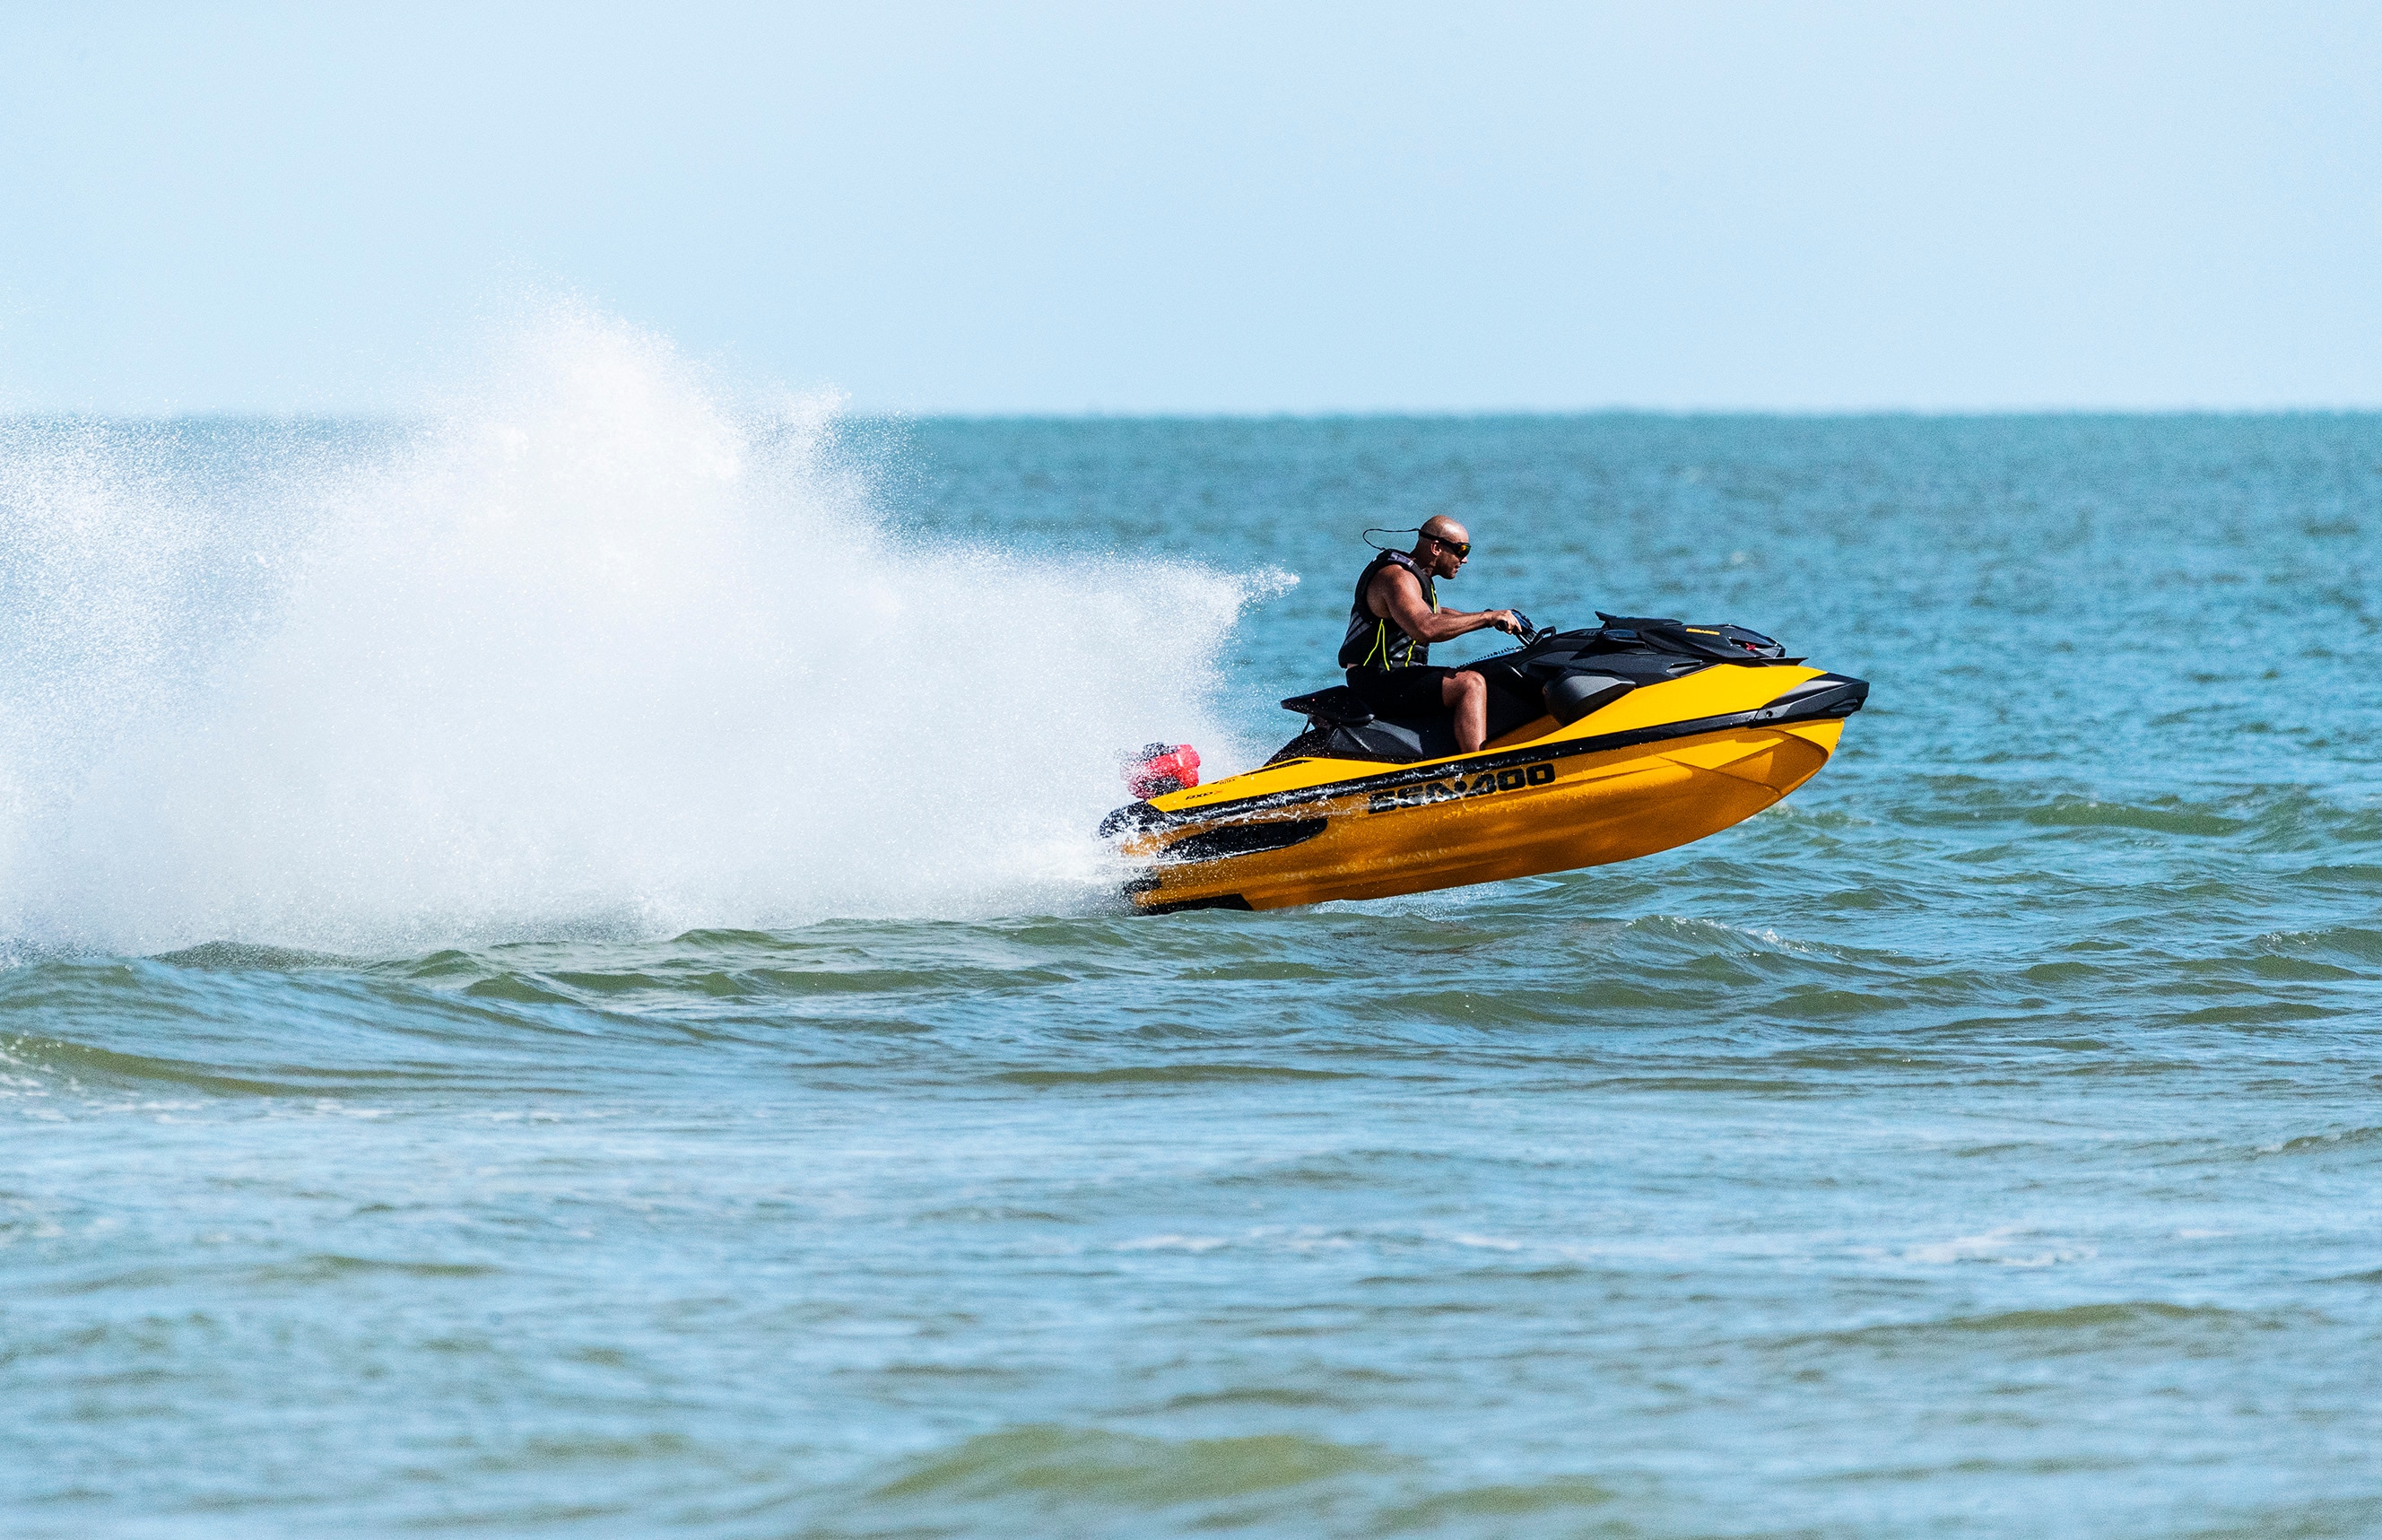 Man sipping a cup of tea on his Sea-doo personal watercraft